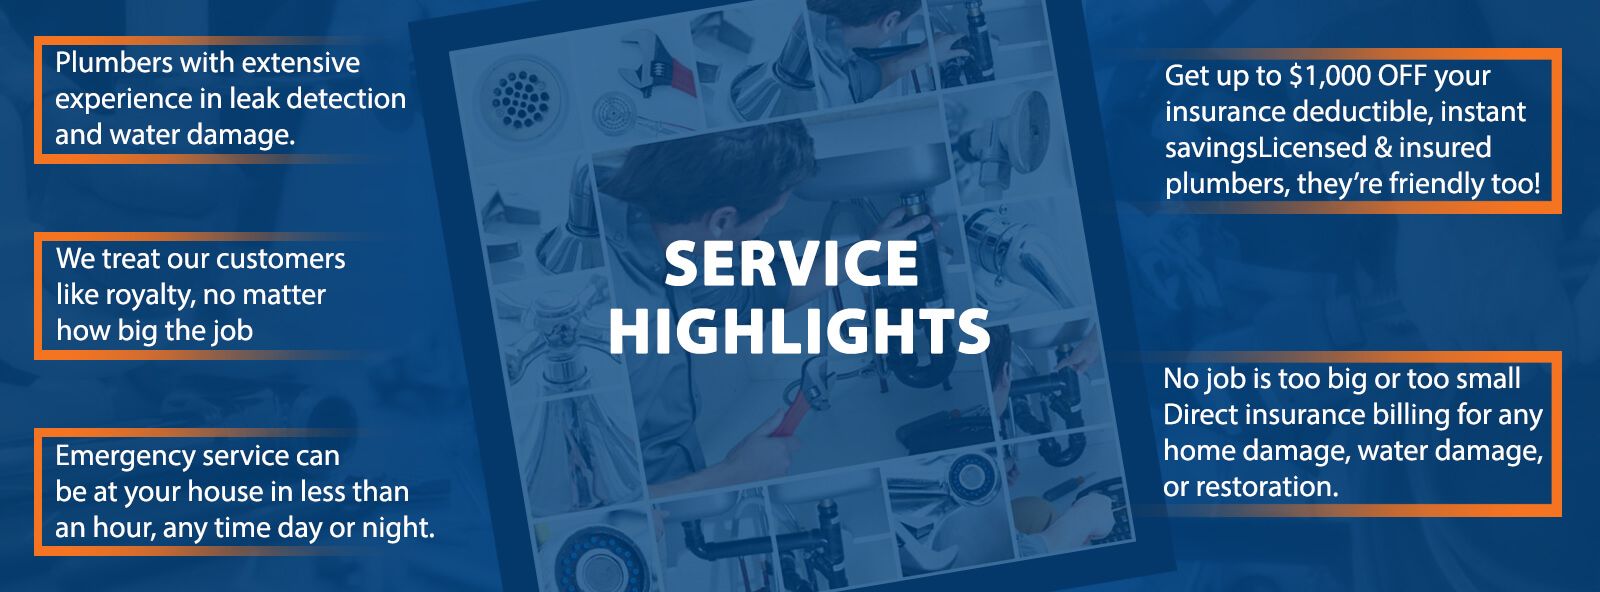 services-highlight-1